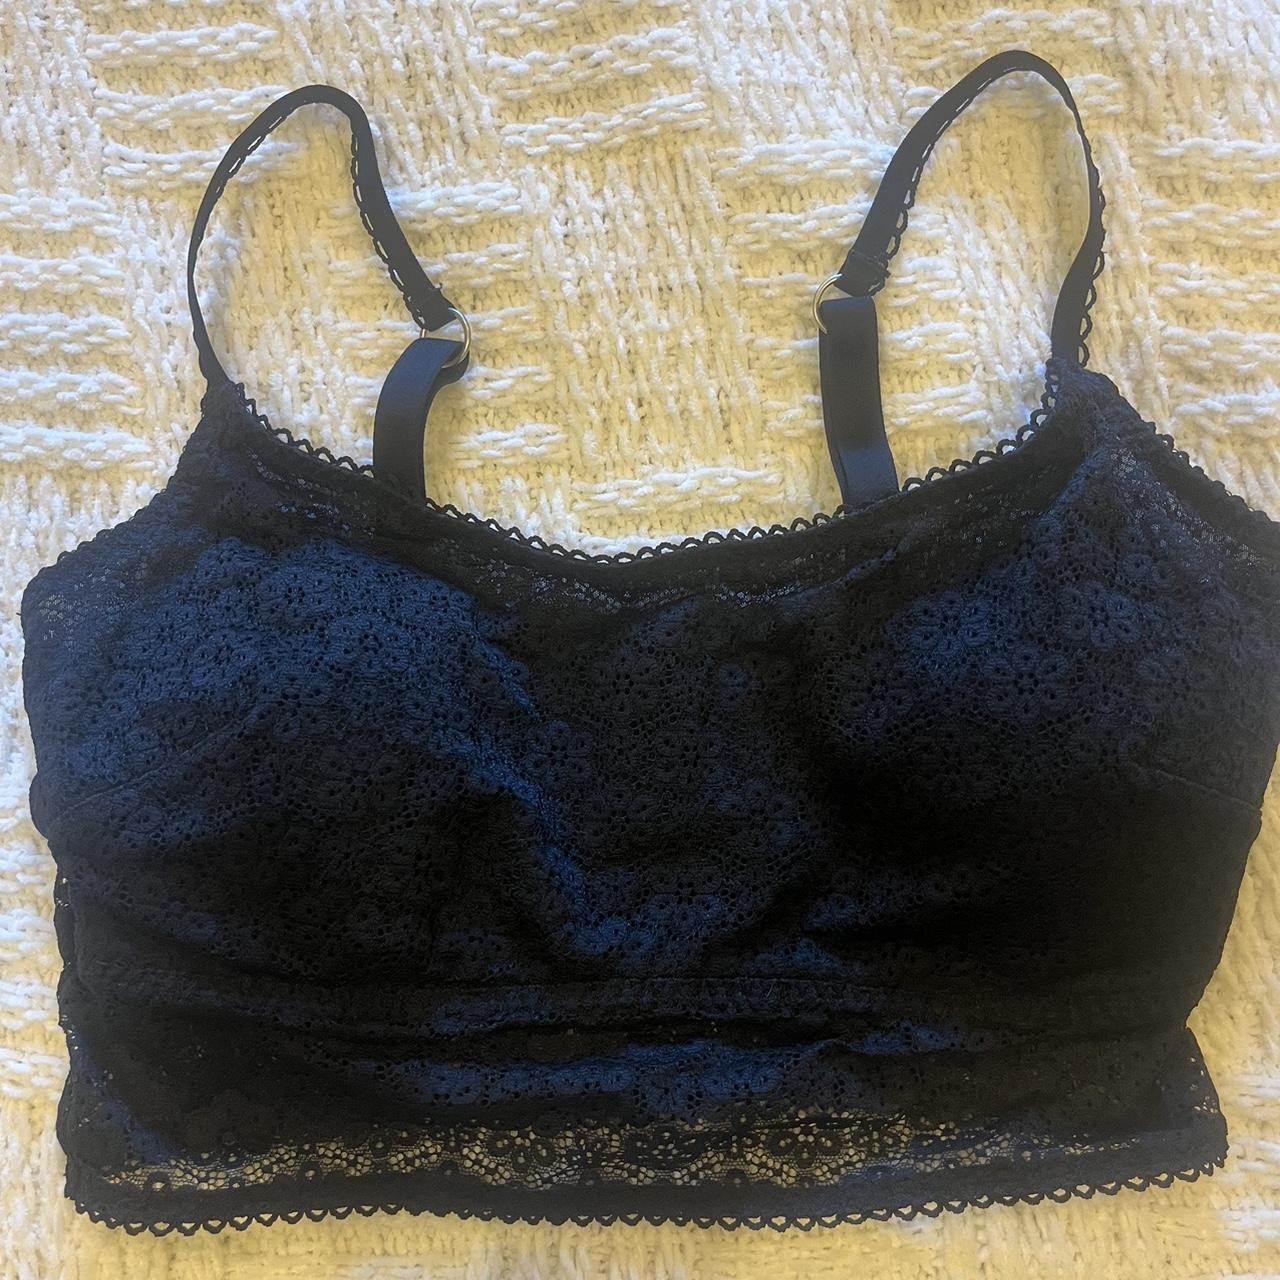 Hollister Gilly Hicks olive green bra top with tie - Depop